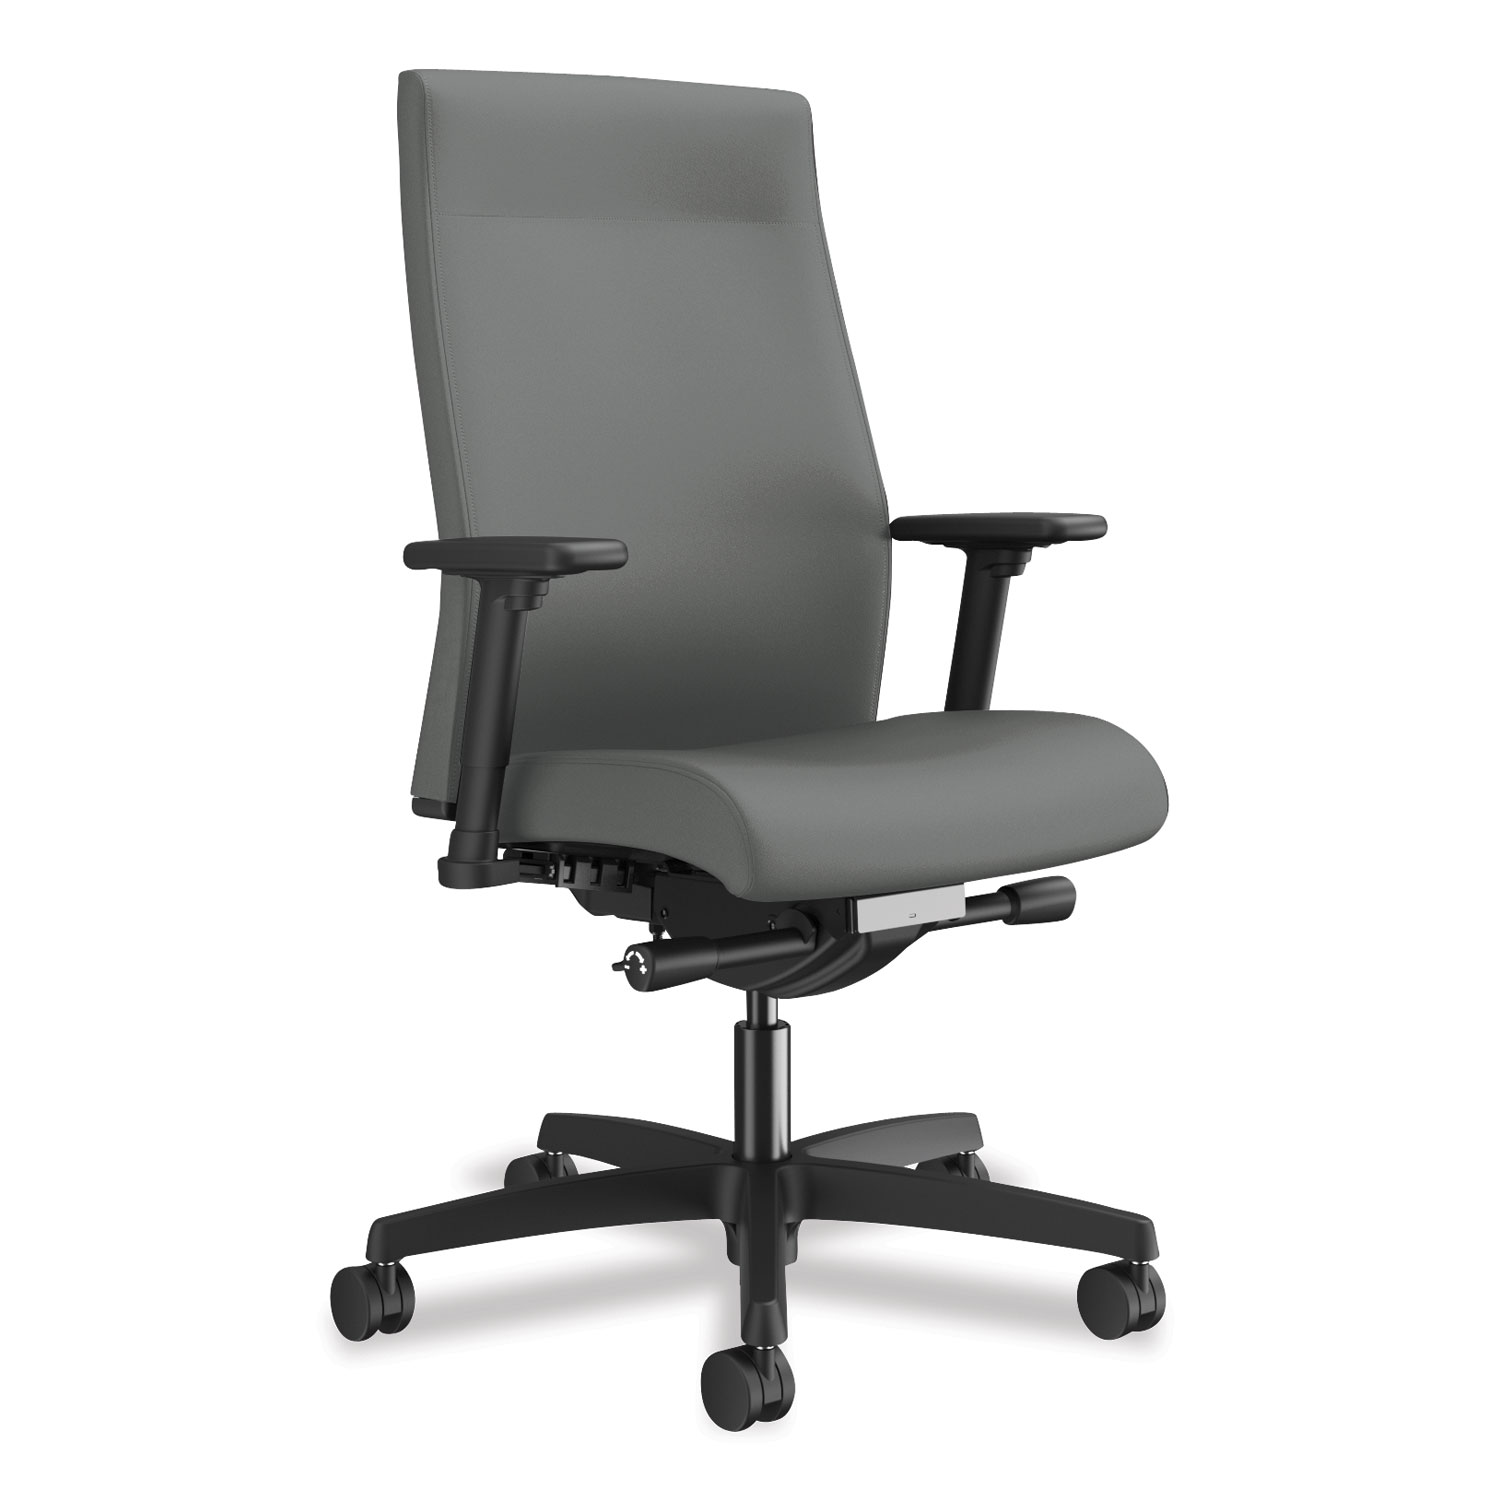  HON HONI2UL2AC22TK Ignition 2.0 Upholstered Mid-Back Task Chair With Lumbar, Supports up to 300 lbs., Frost Seat, Frost Back, Black Base (HONI2UL2AC22TK) 